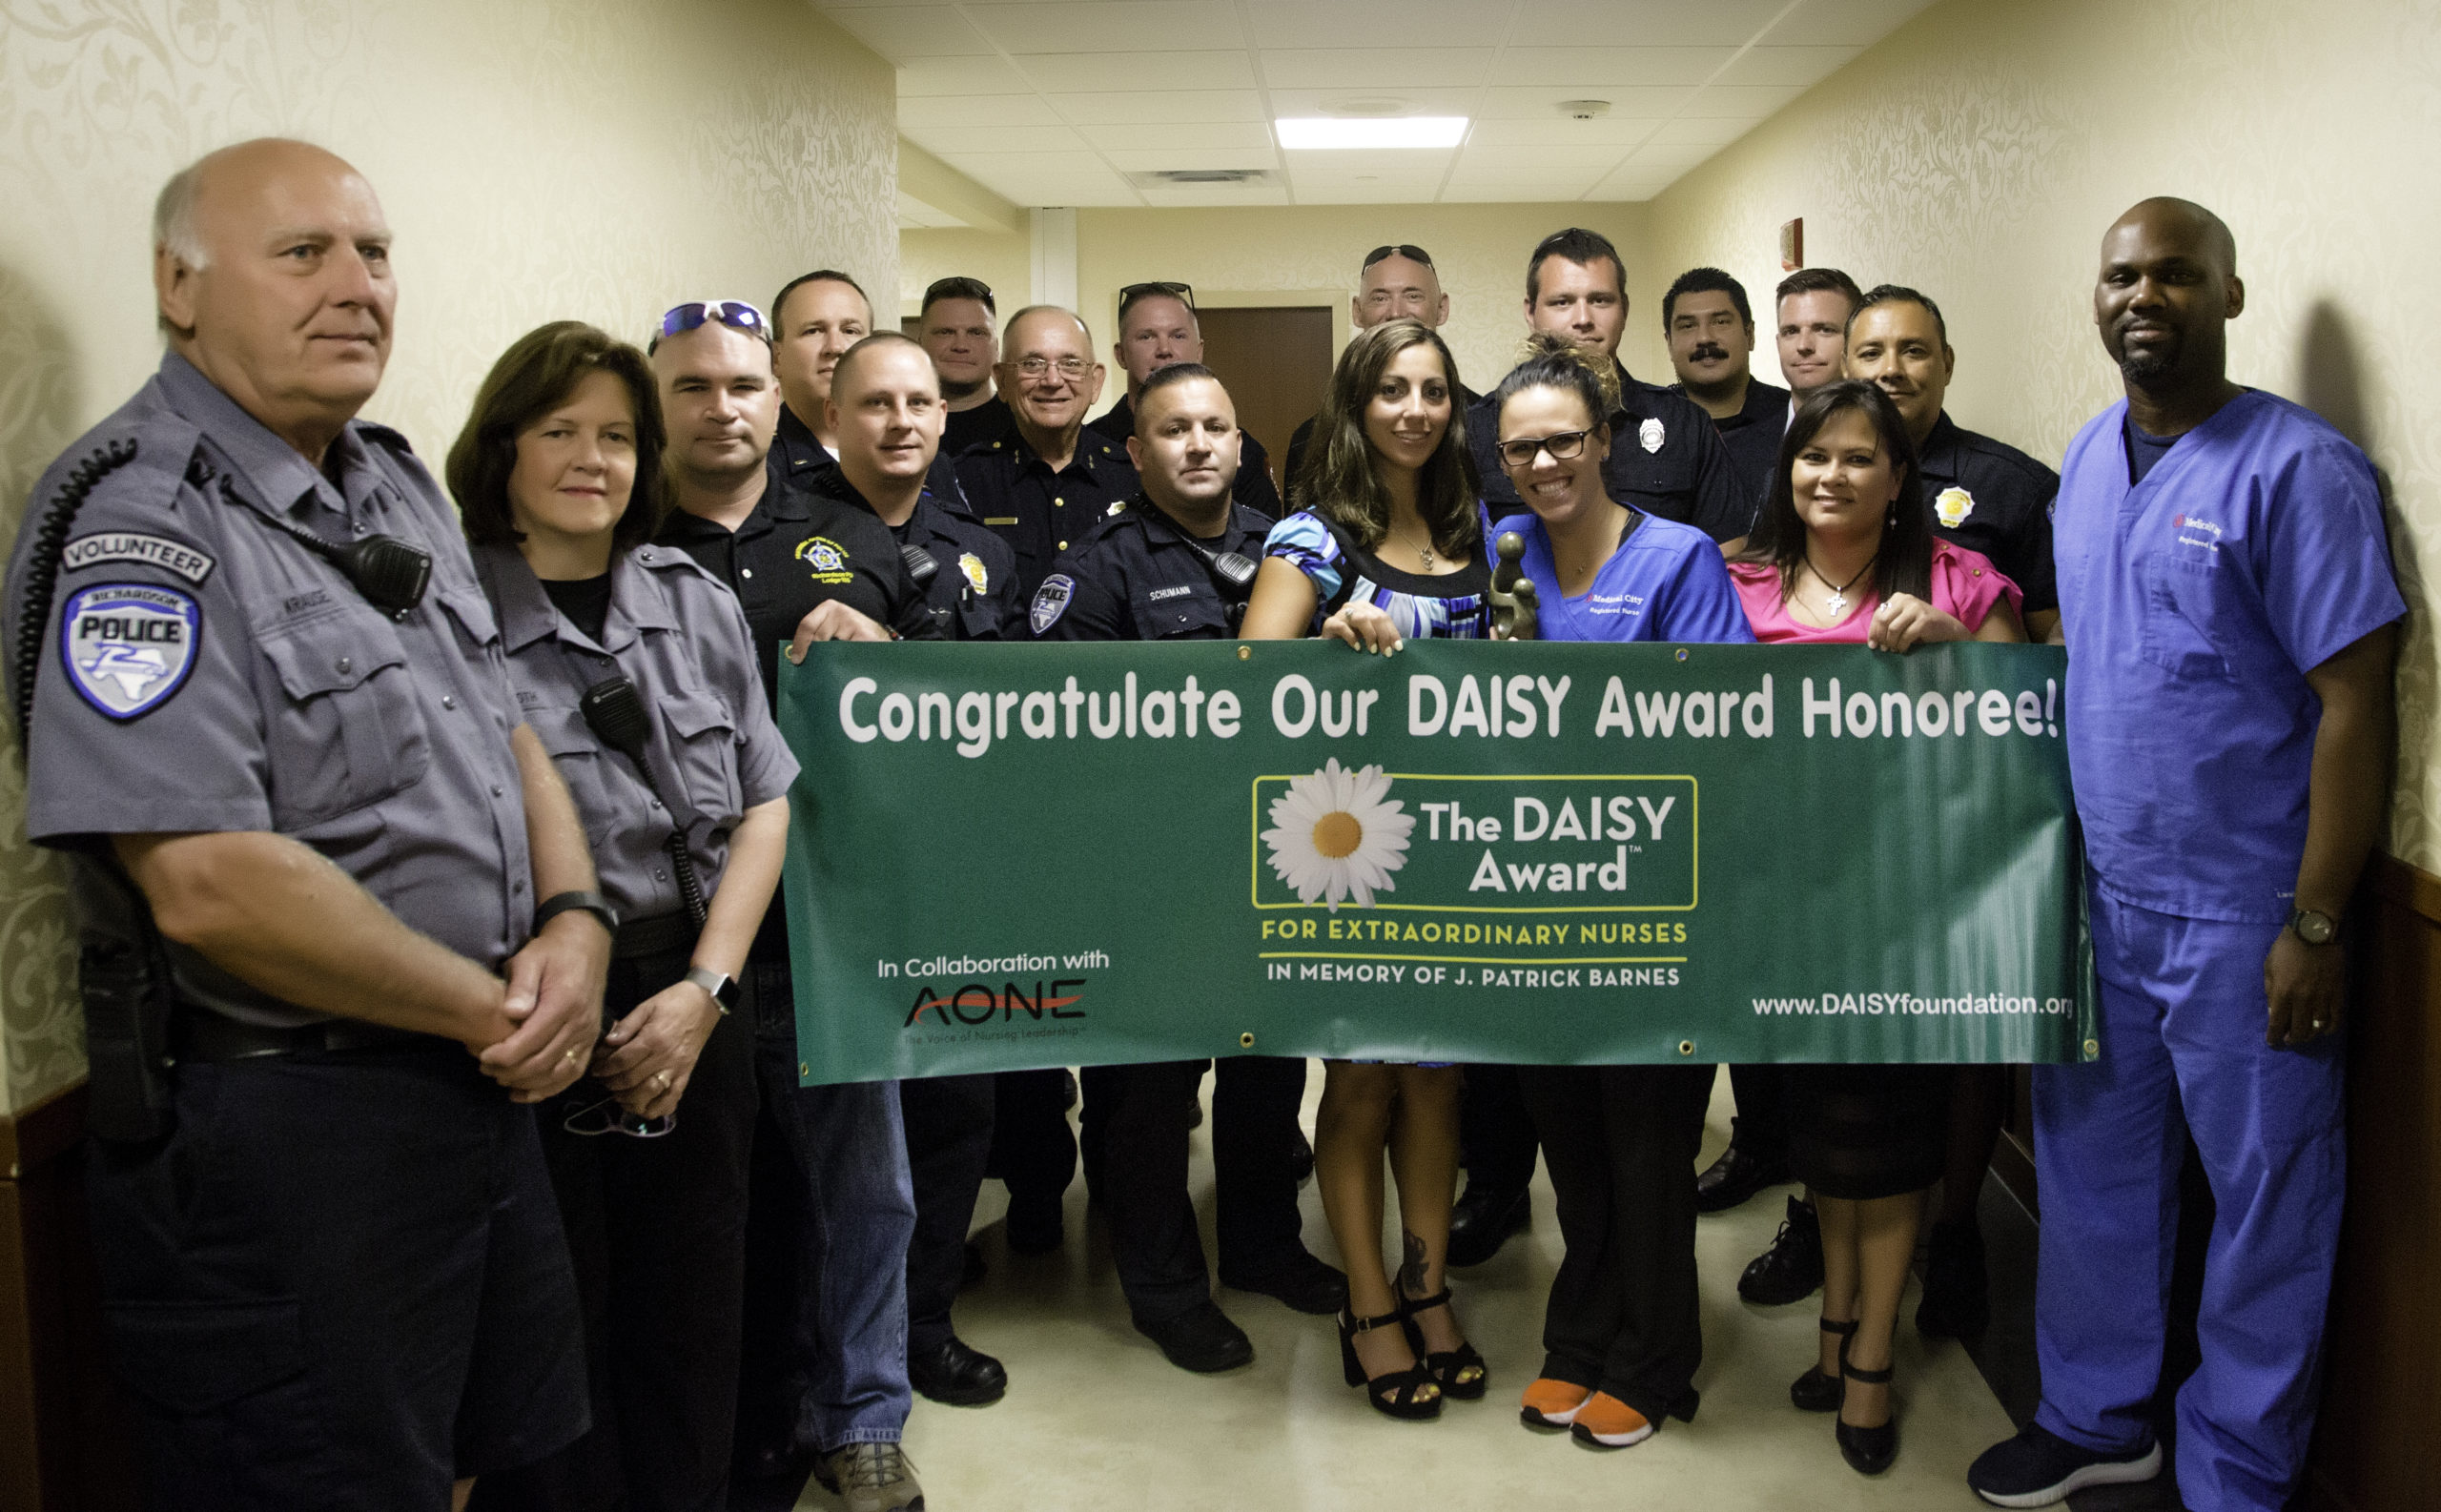 Group of police officers and hospital workers with a Daisy Award banner